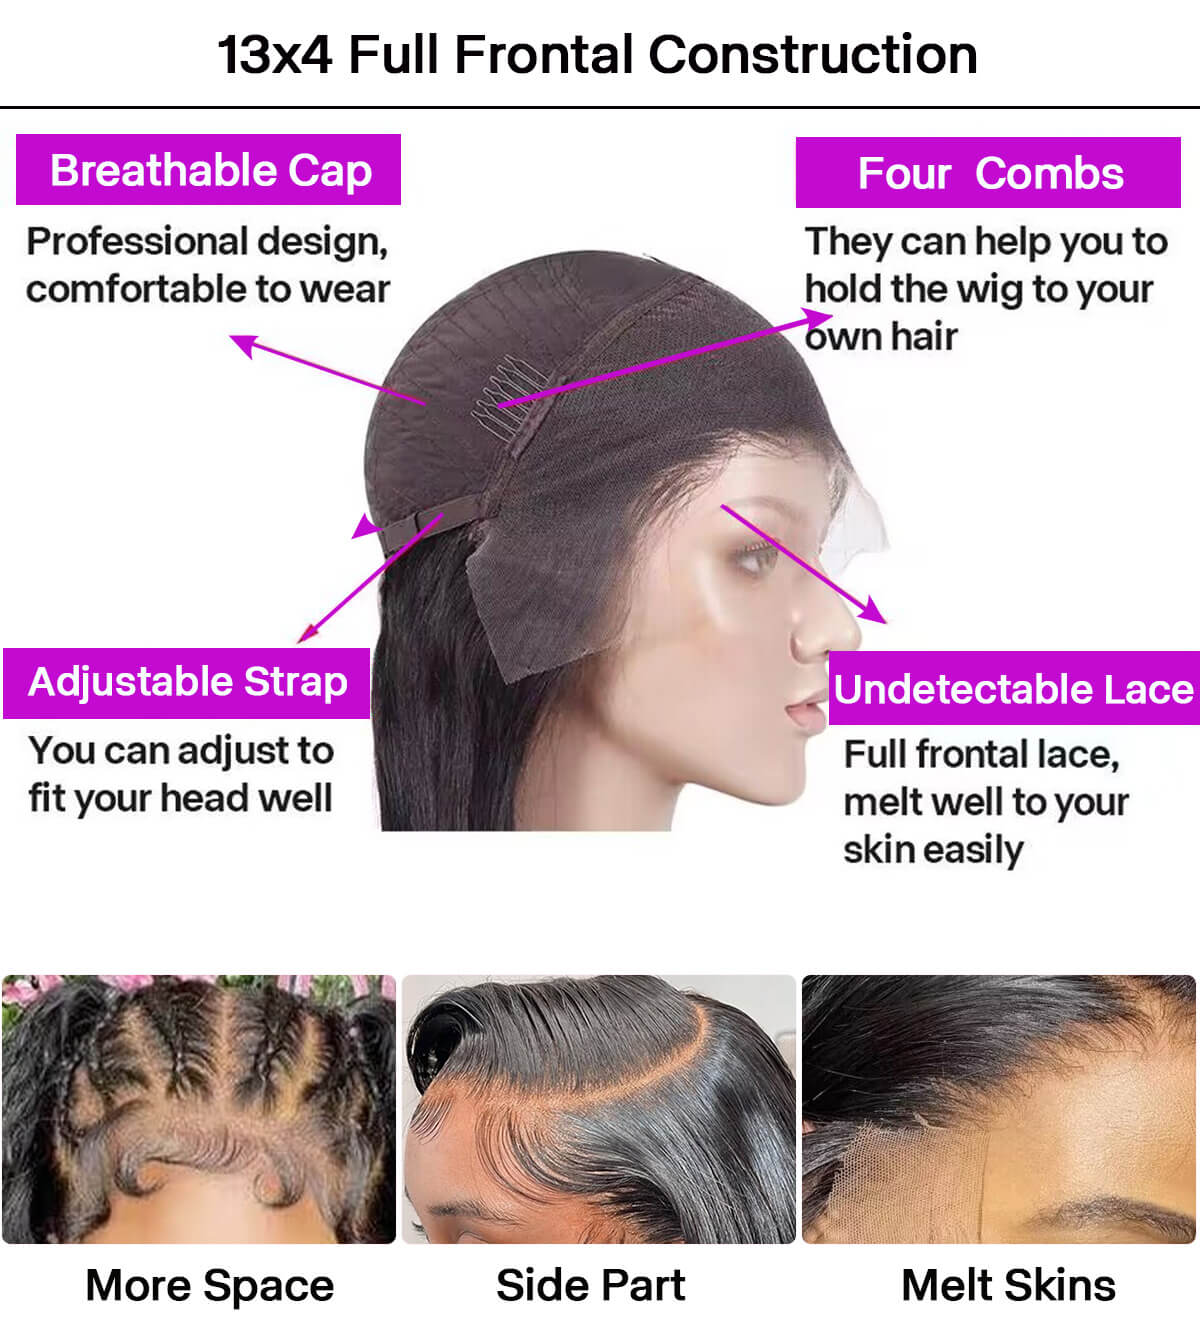 13x4 Full Frontal Wig Construction